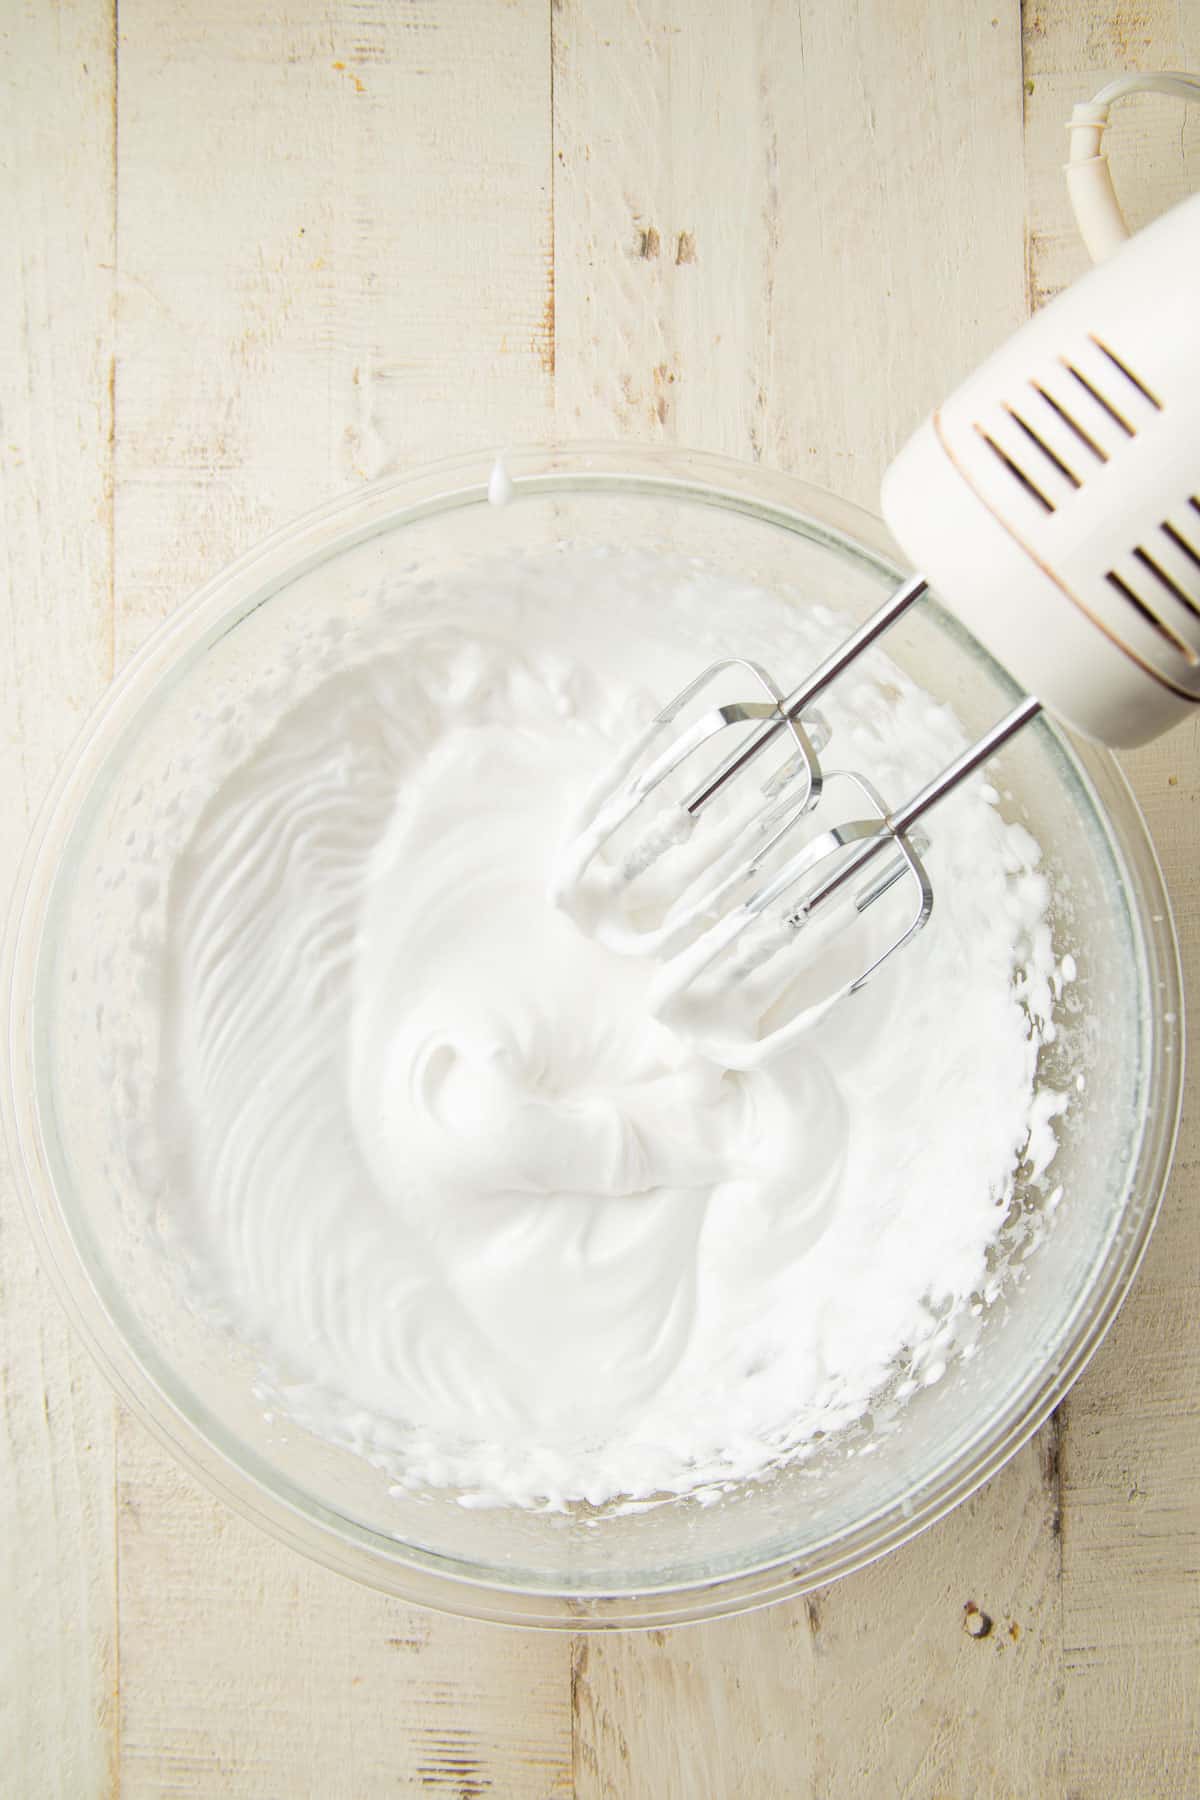 Whipped aquafaba in a mixing bowl with electric mixer.